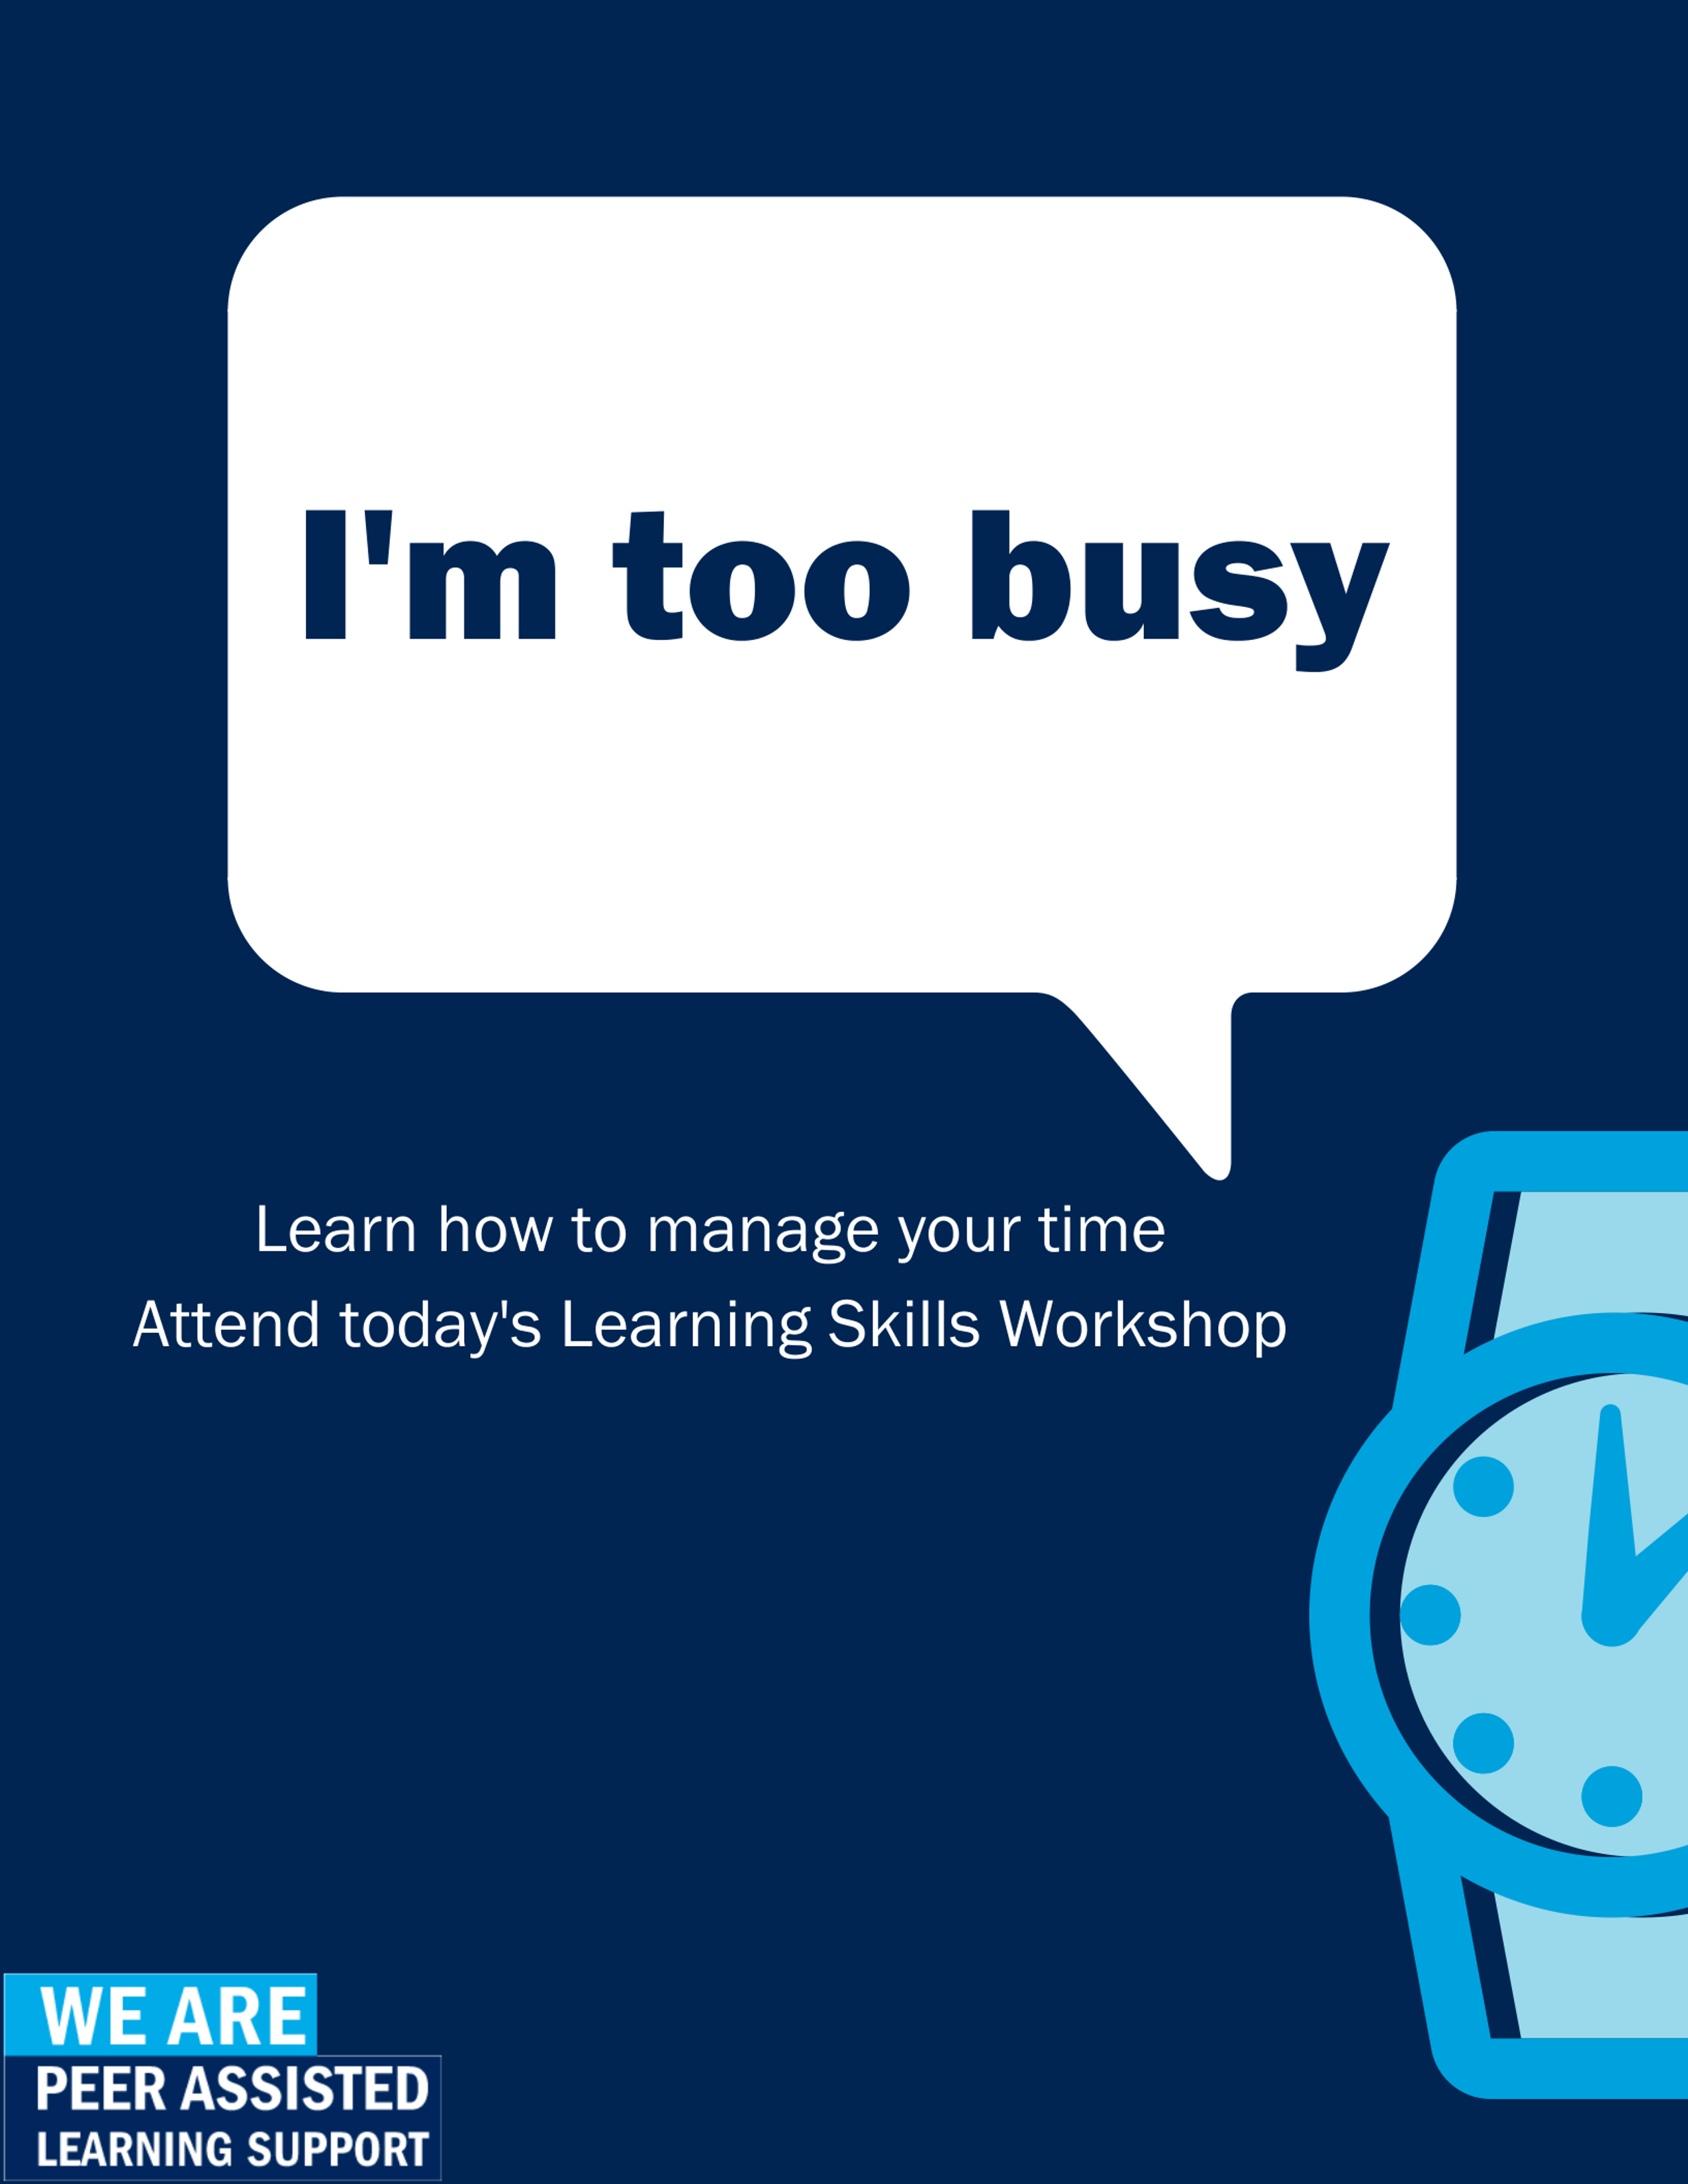 An image of a watch on a dark blue background. Background text says “I’m too busy. Learn how to manage your time. Attend today’s